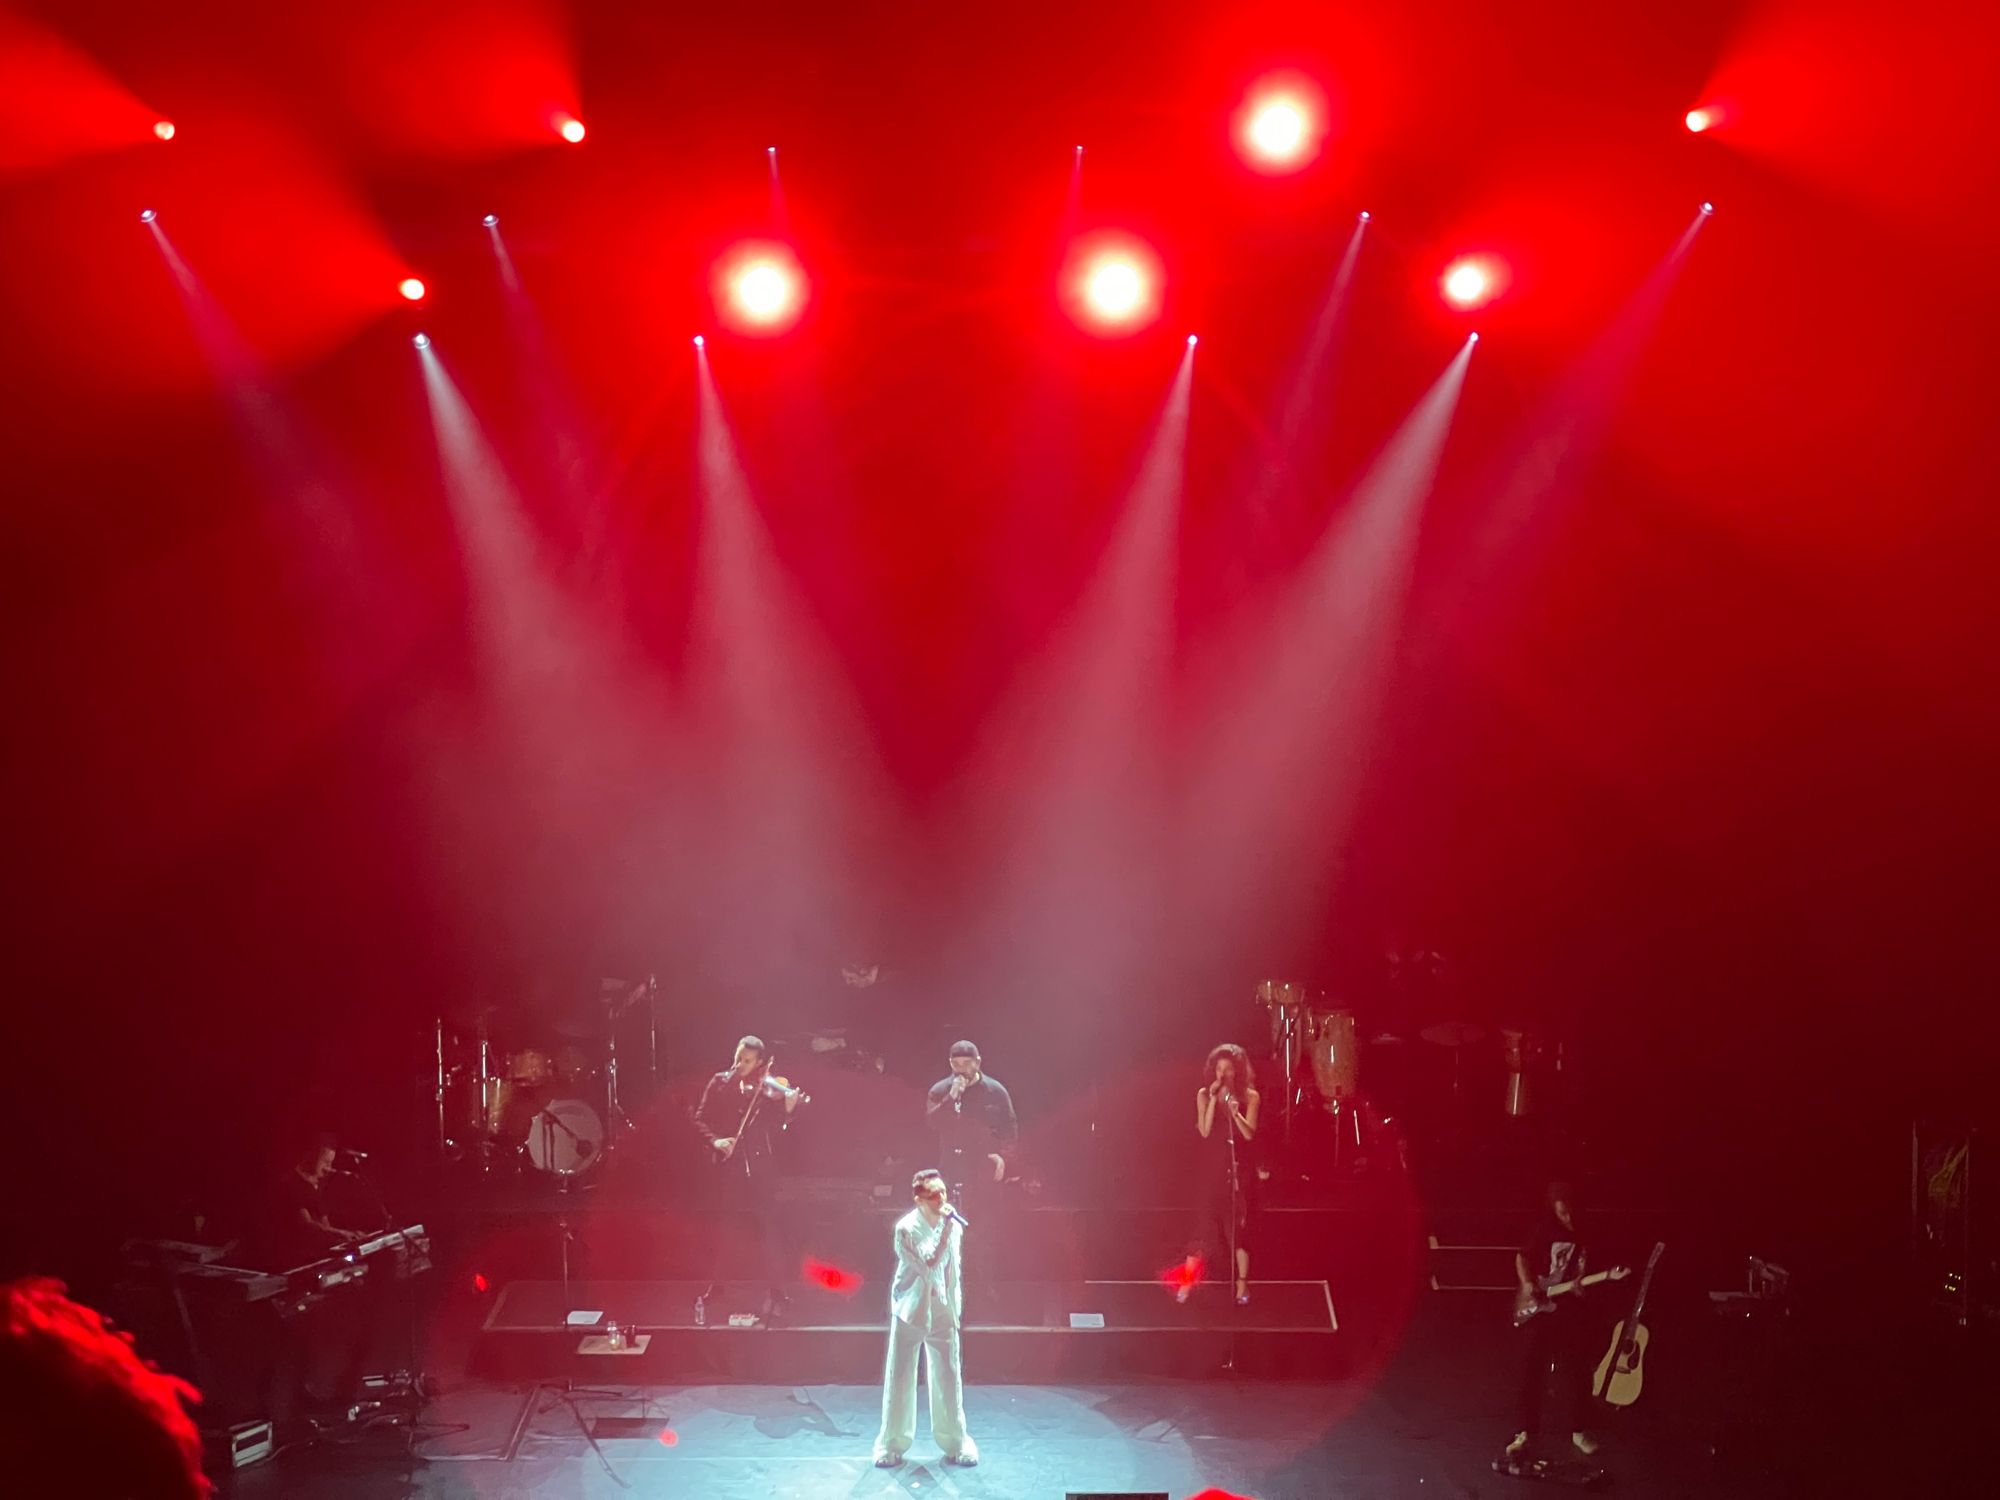 Mabel Matiz stands on a stage lit in red, wearing a bright white outfit, singing in front of his band who are all wearing black (two drummers, keyboardist, violinist, two backing singers, and violinist.)